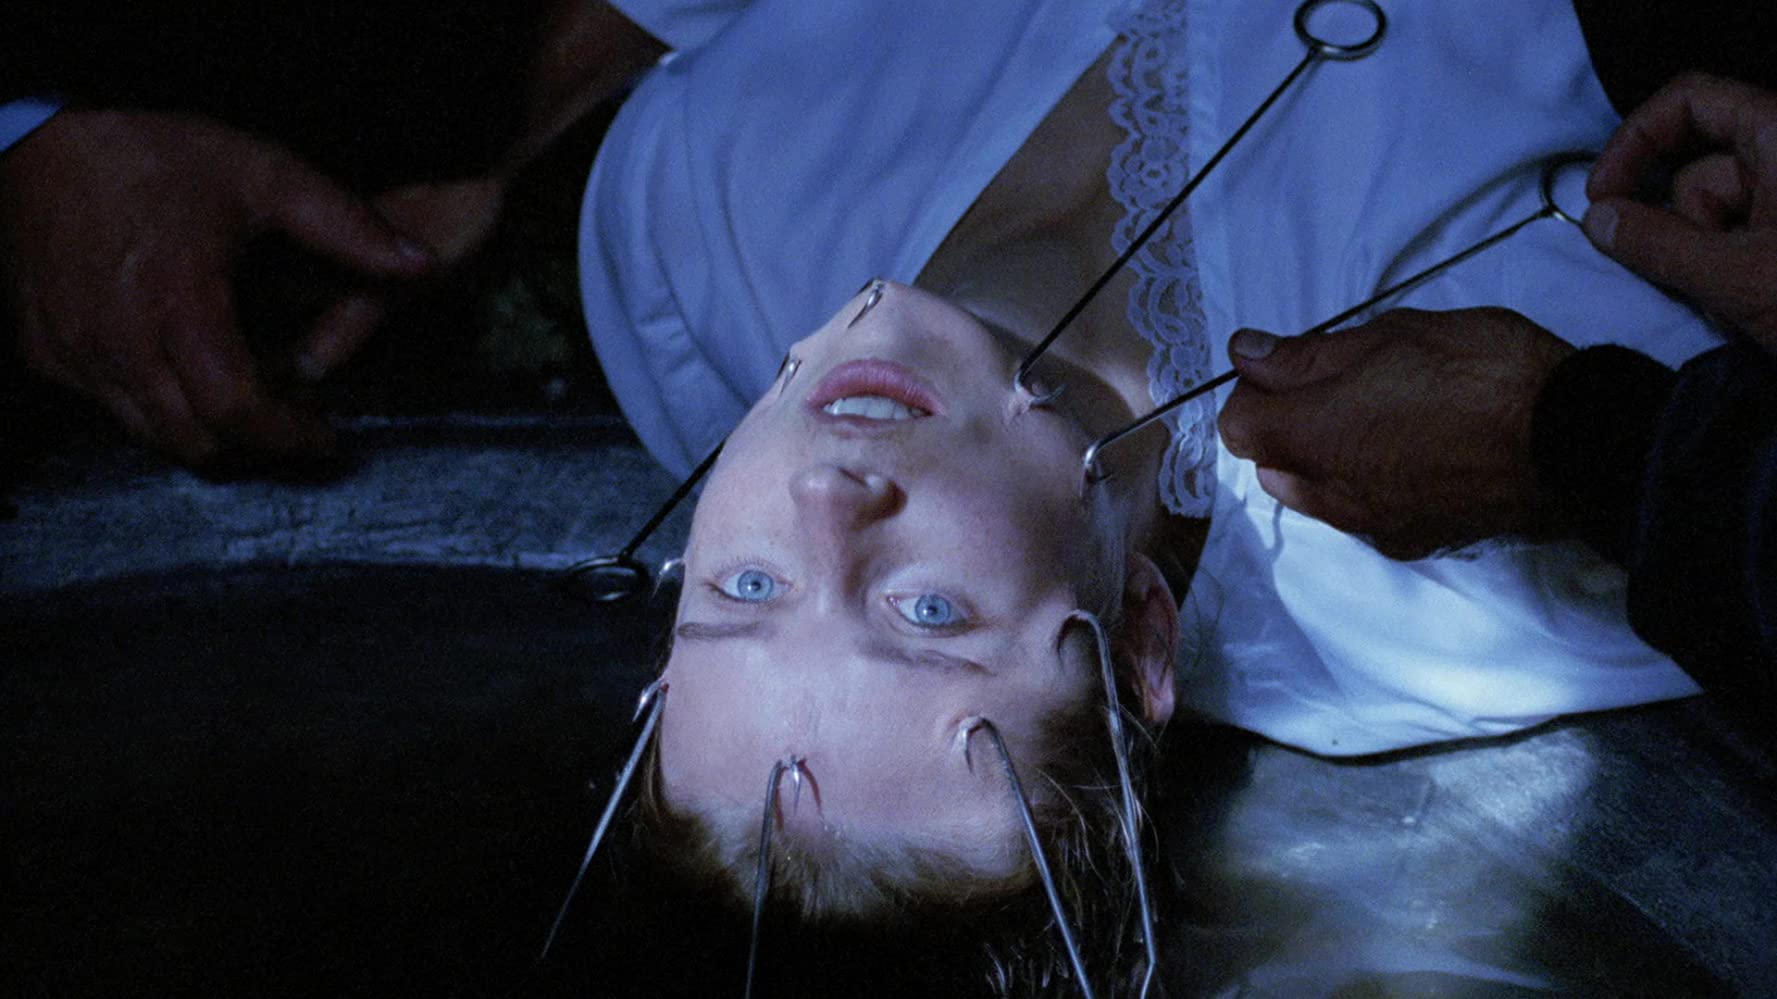 Angelika Maria Boeck has hooks placed her to remove her face in The Sect (1991)